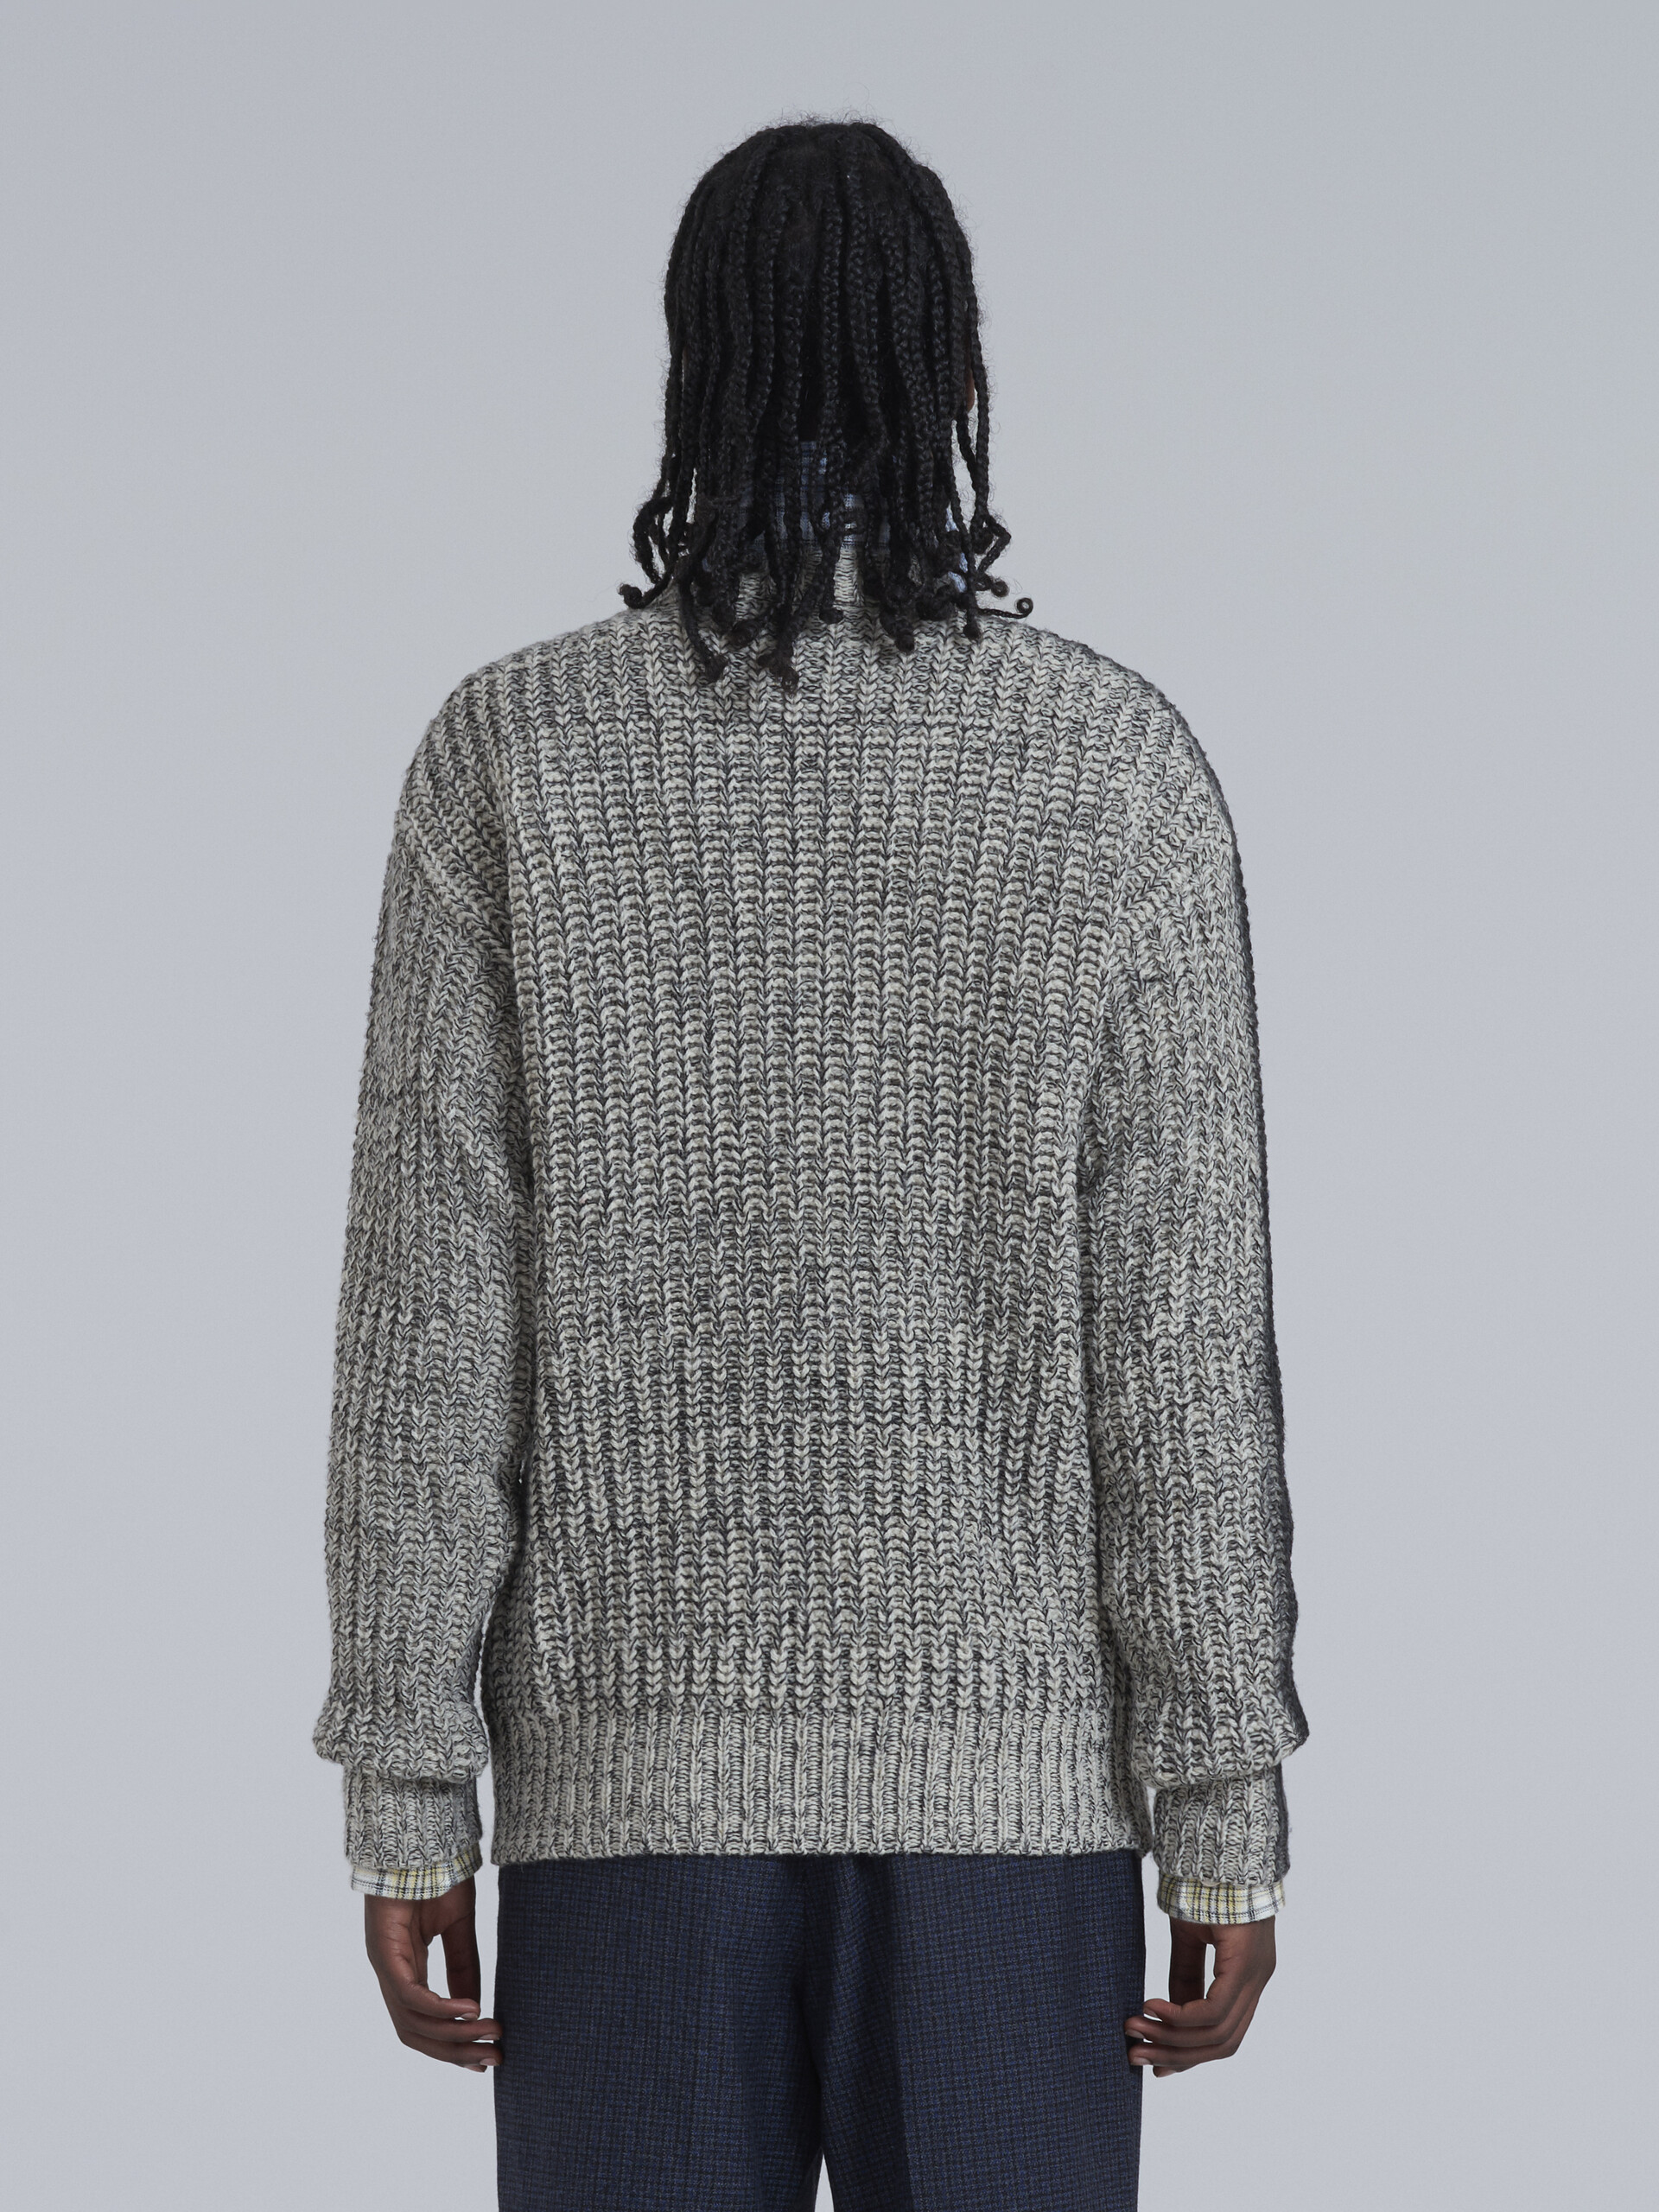 Mouliné Shetland wool sweater with contrast-sprayed neck and sleeves - Pullovers - Image 3